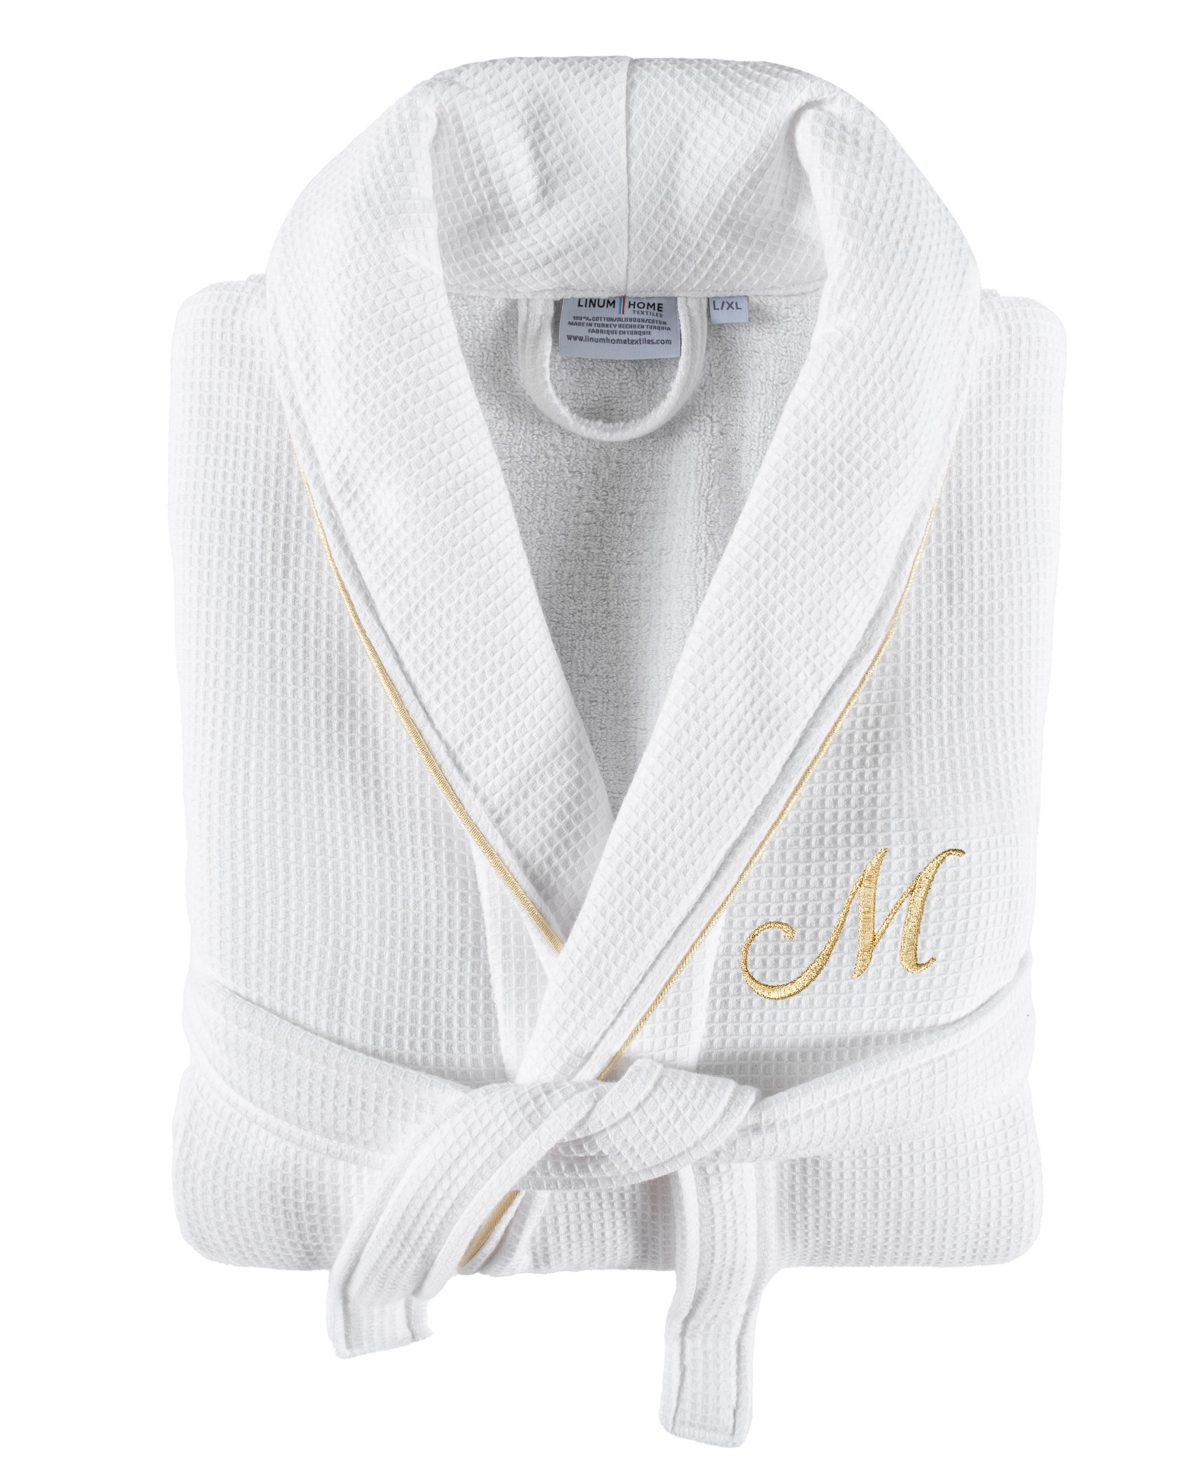 Shop Linum Home Textiles 100% Turkish Cotton Unisex Personalized Waffle Weave Terry Bathrobe With Satin Piped Trim In White M